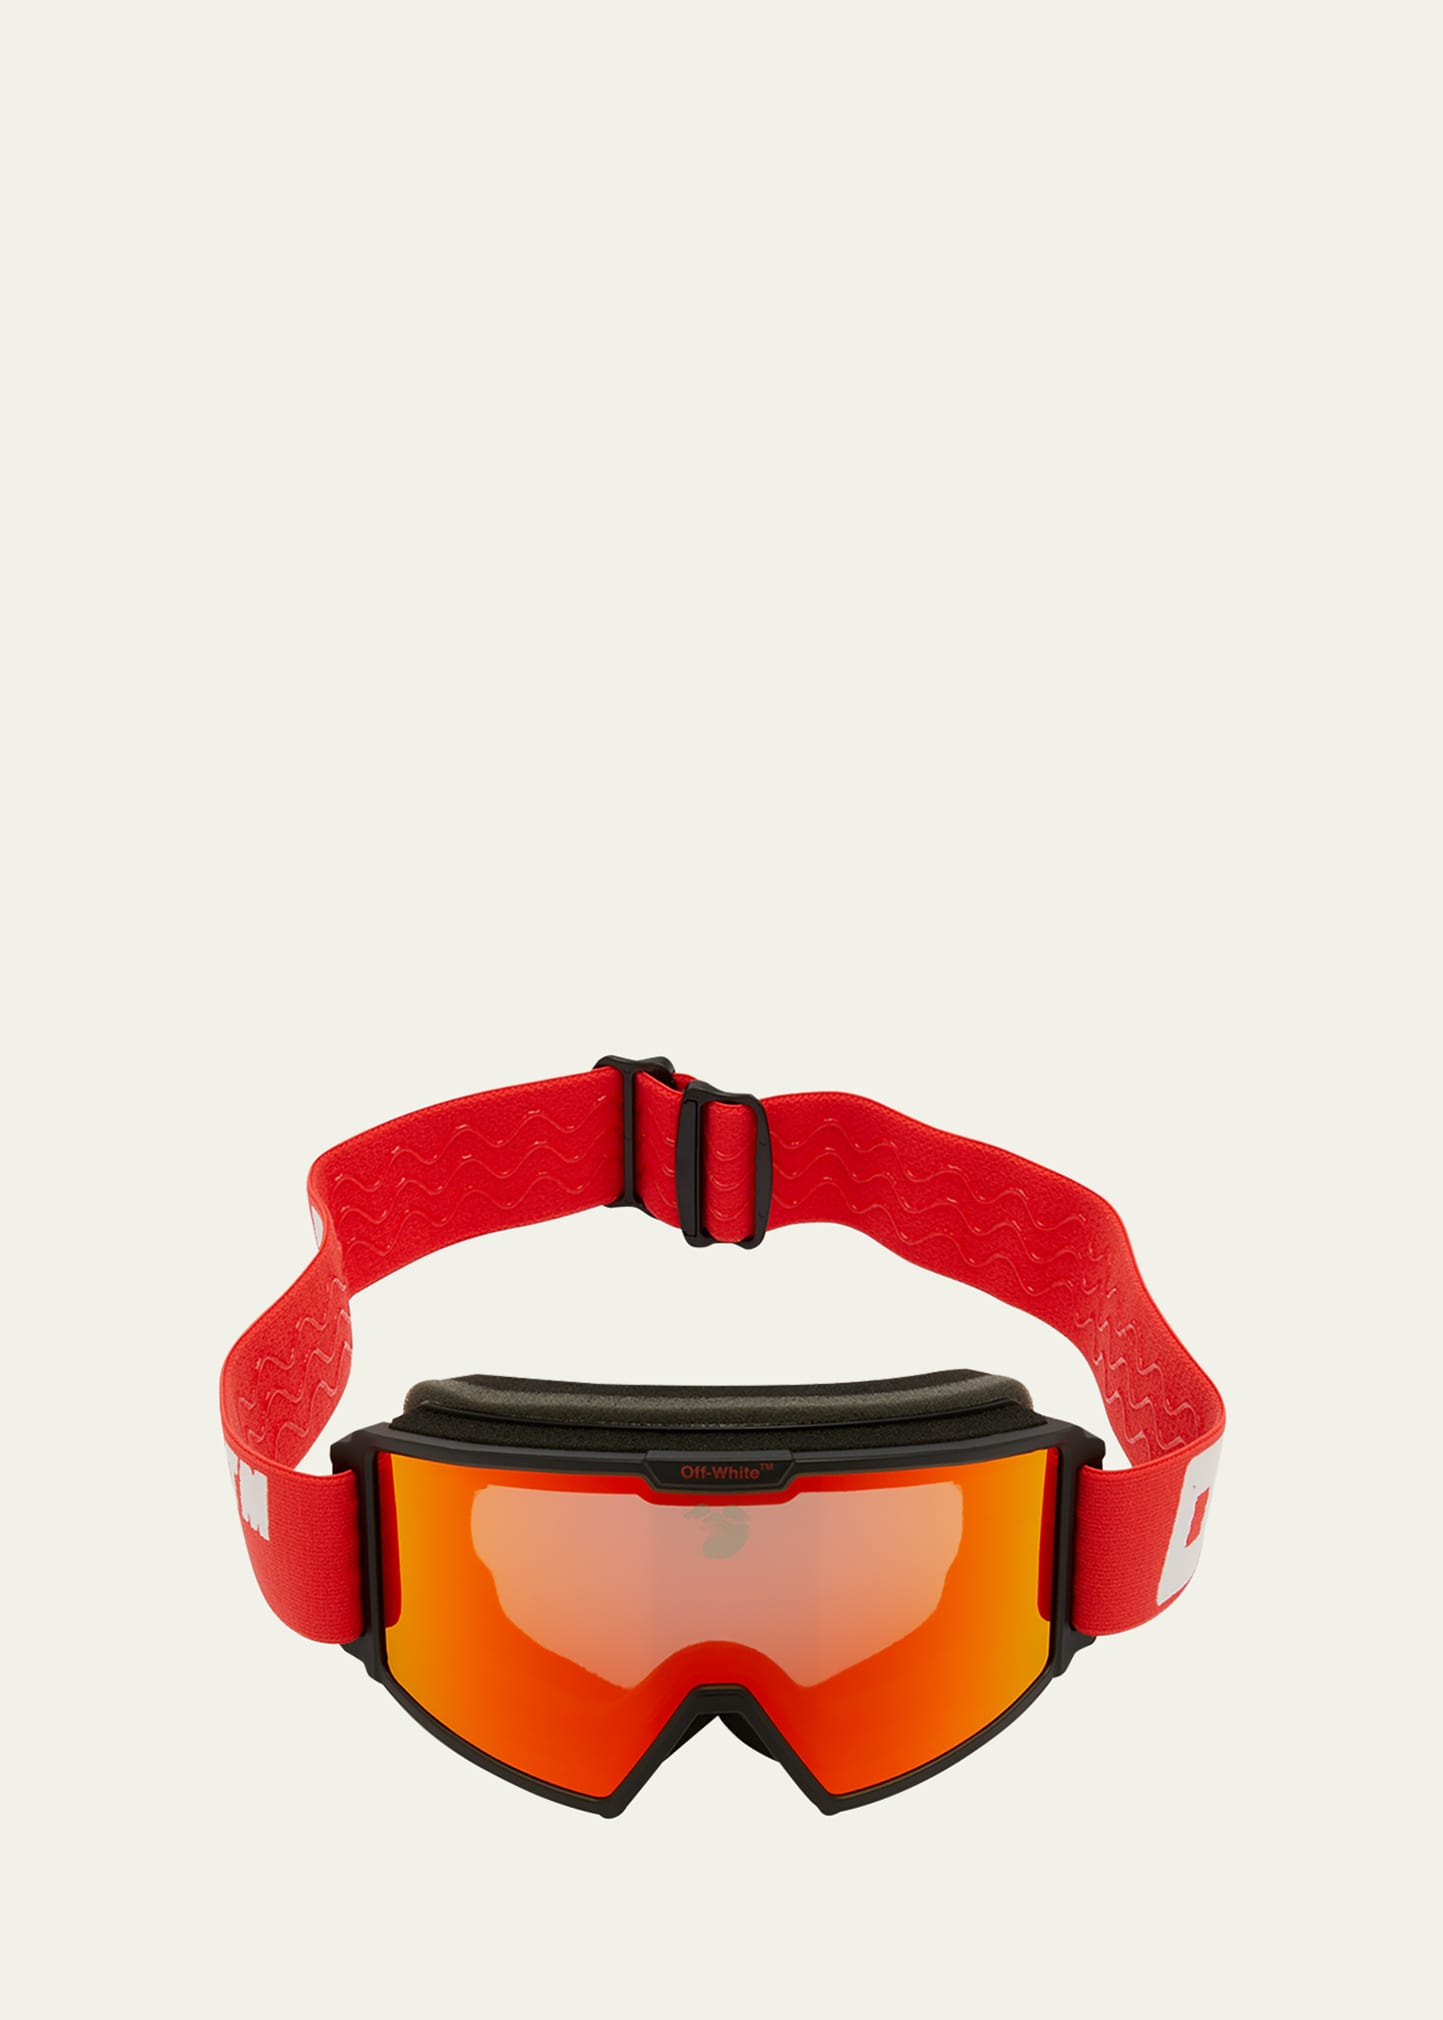 Off-white Men's Mirror Lens Ski Goggles In Red Mir Red